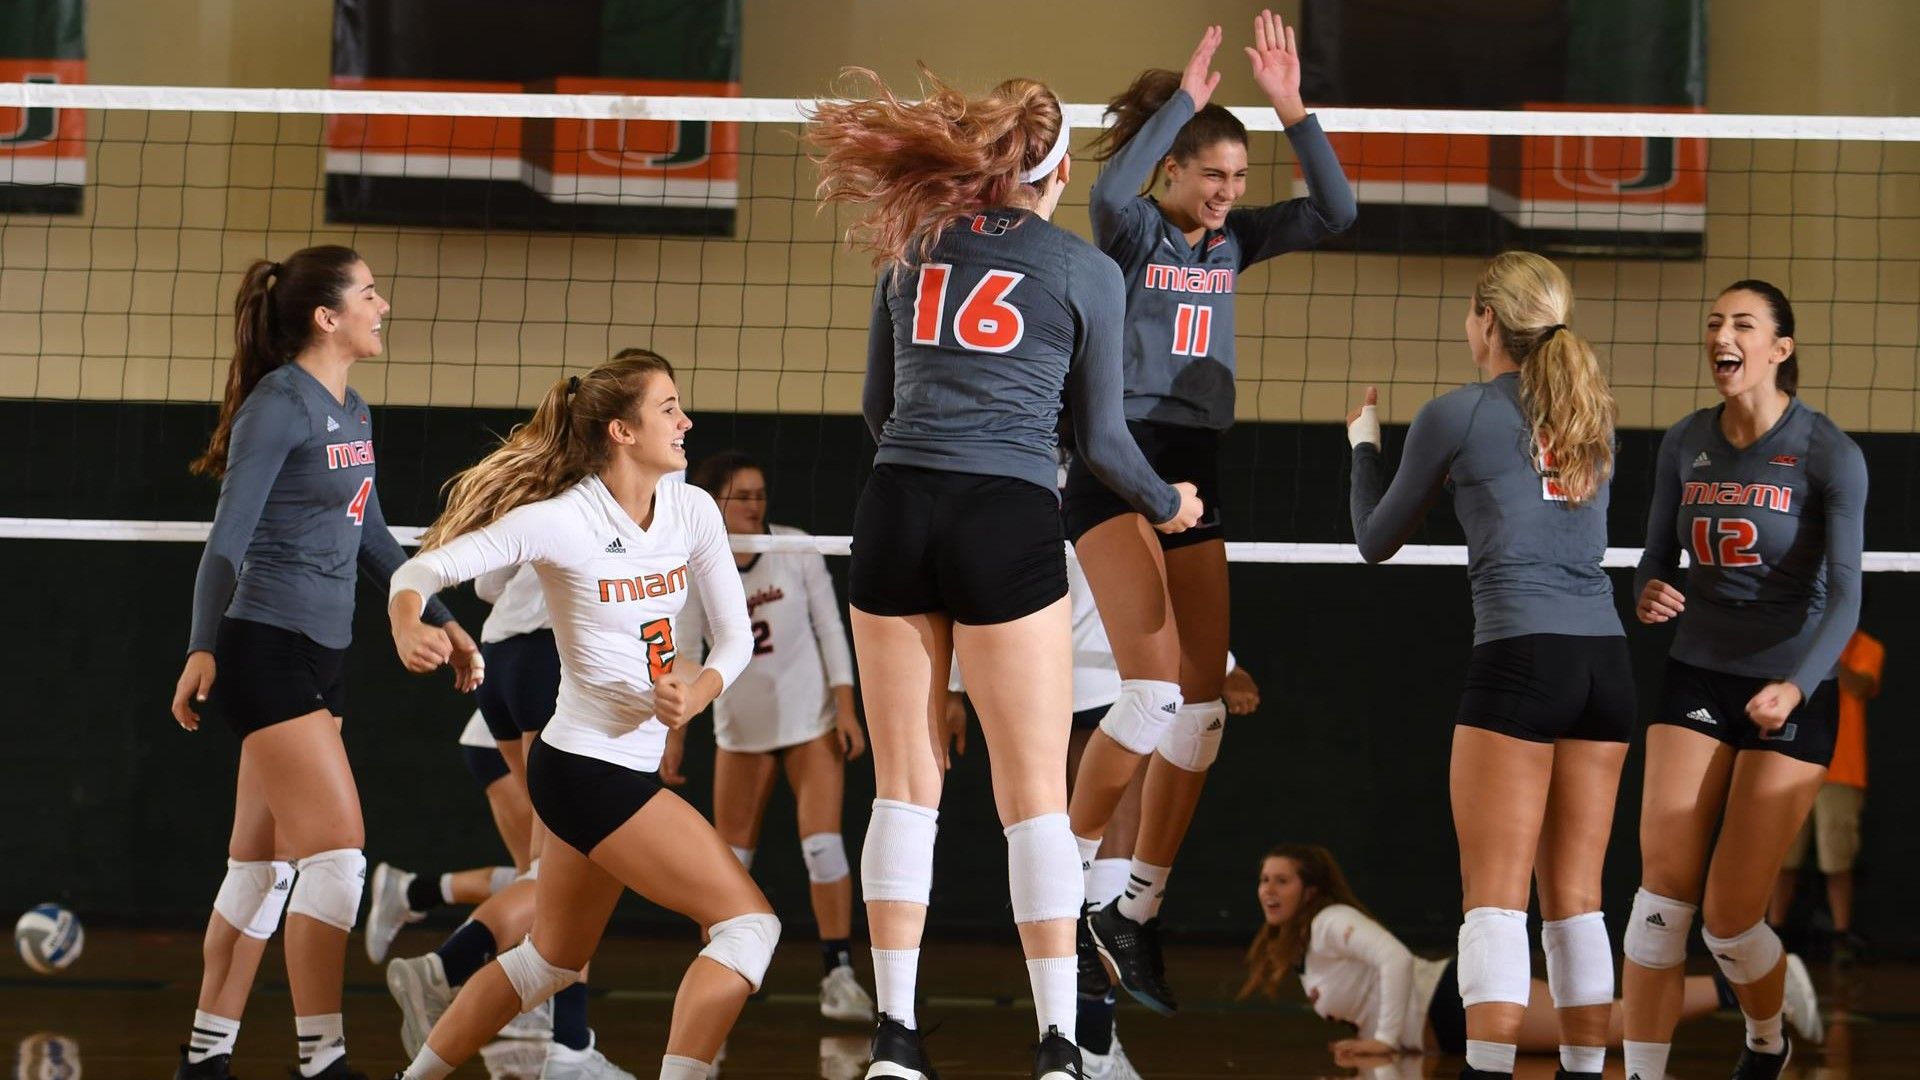 Canes Volleyball Dominates the Seminoles at Home, 3-0